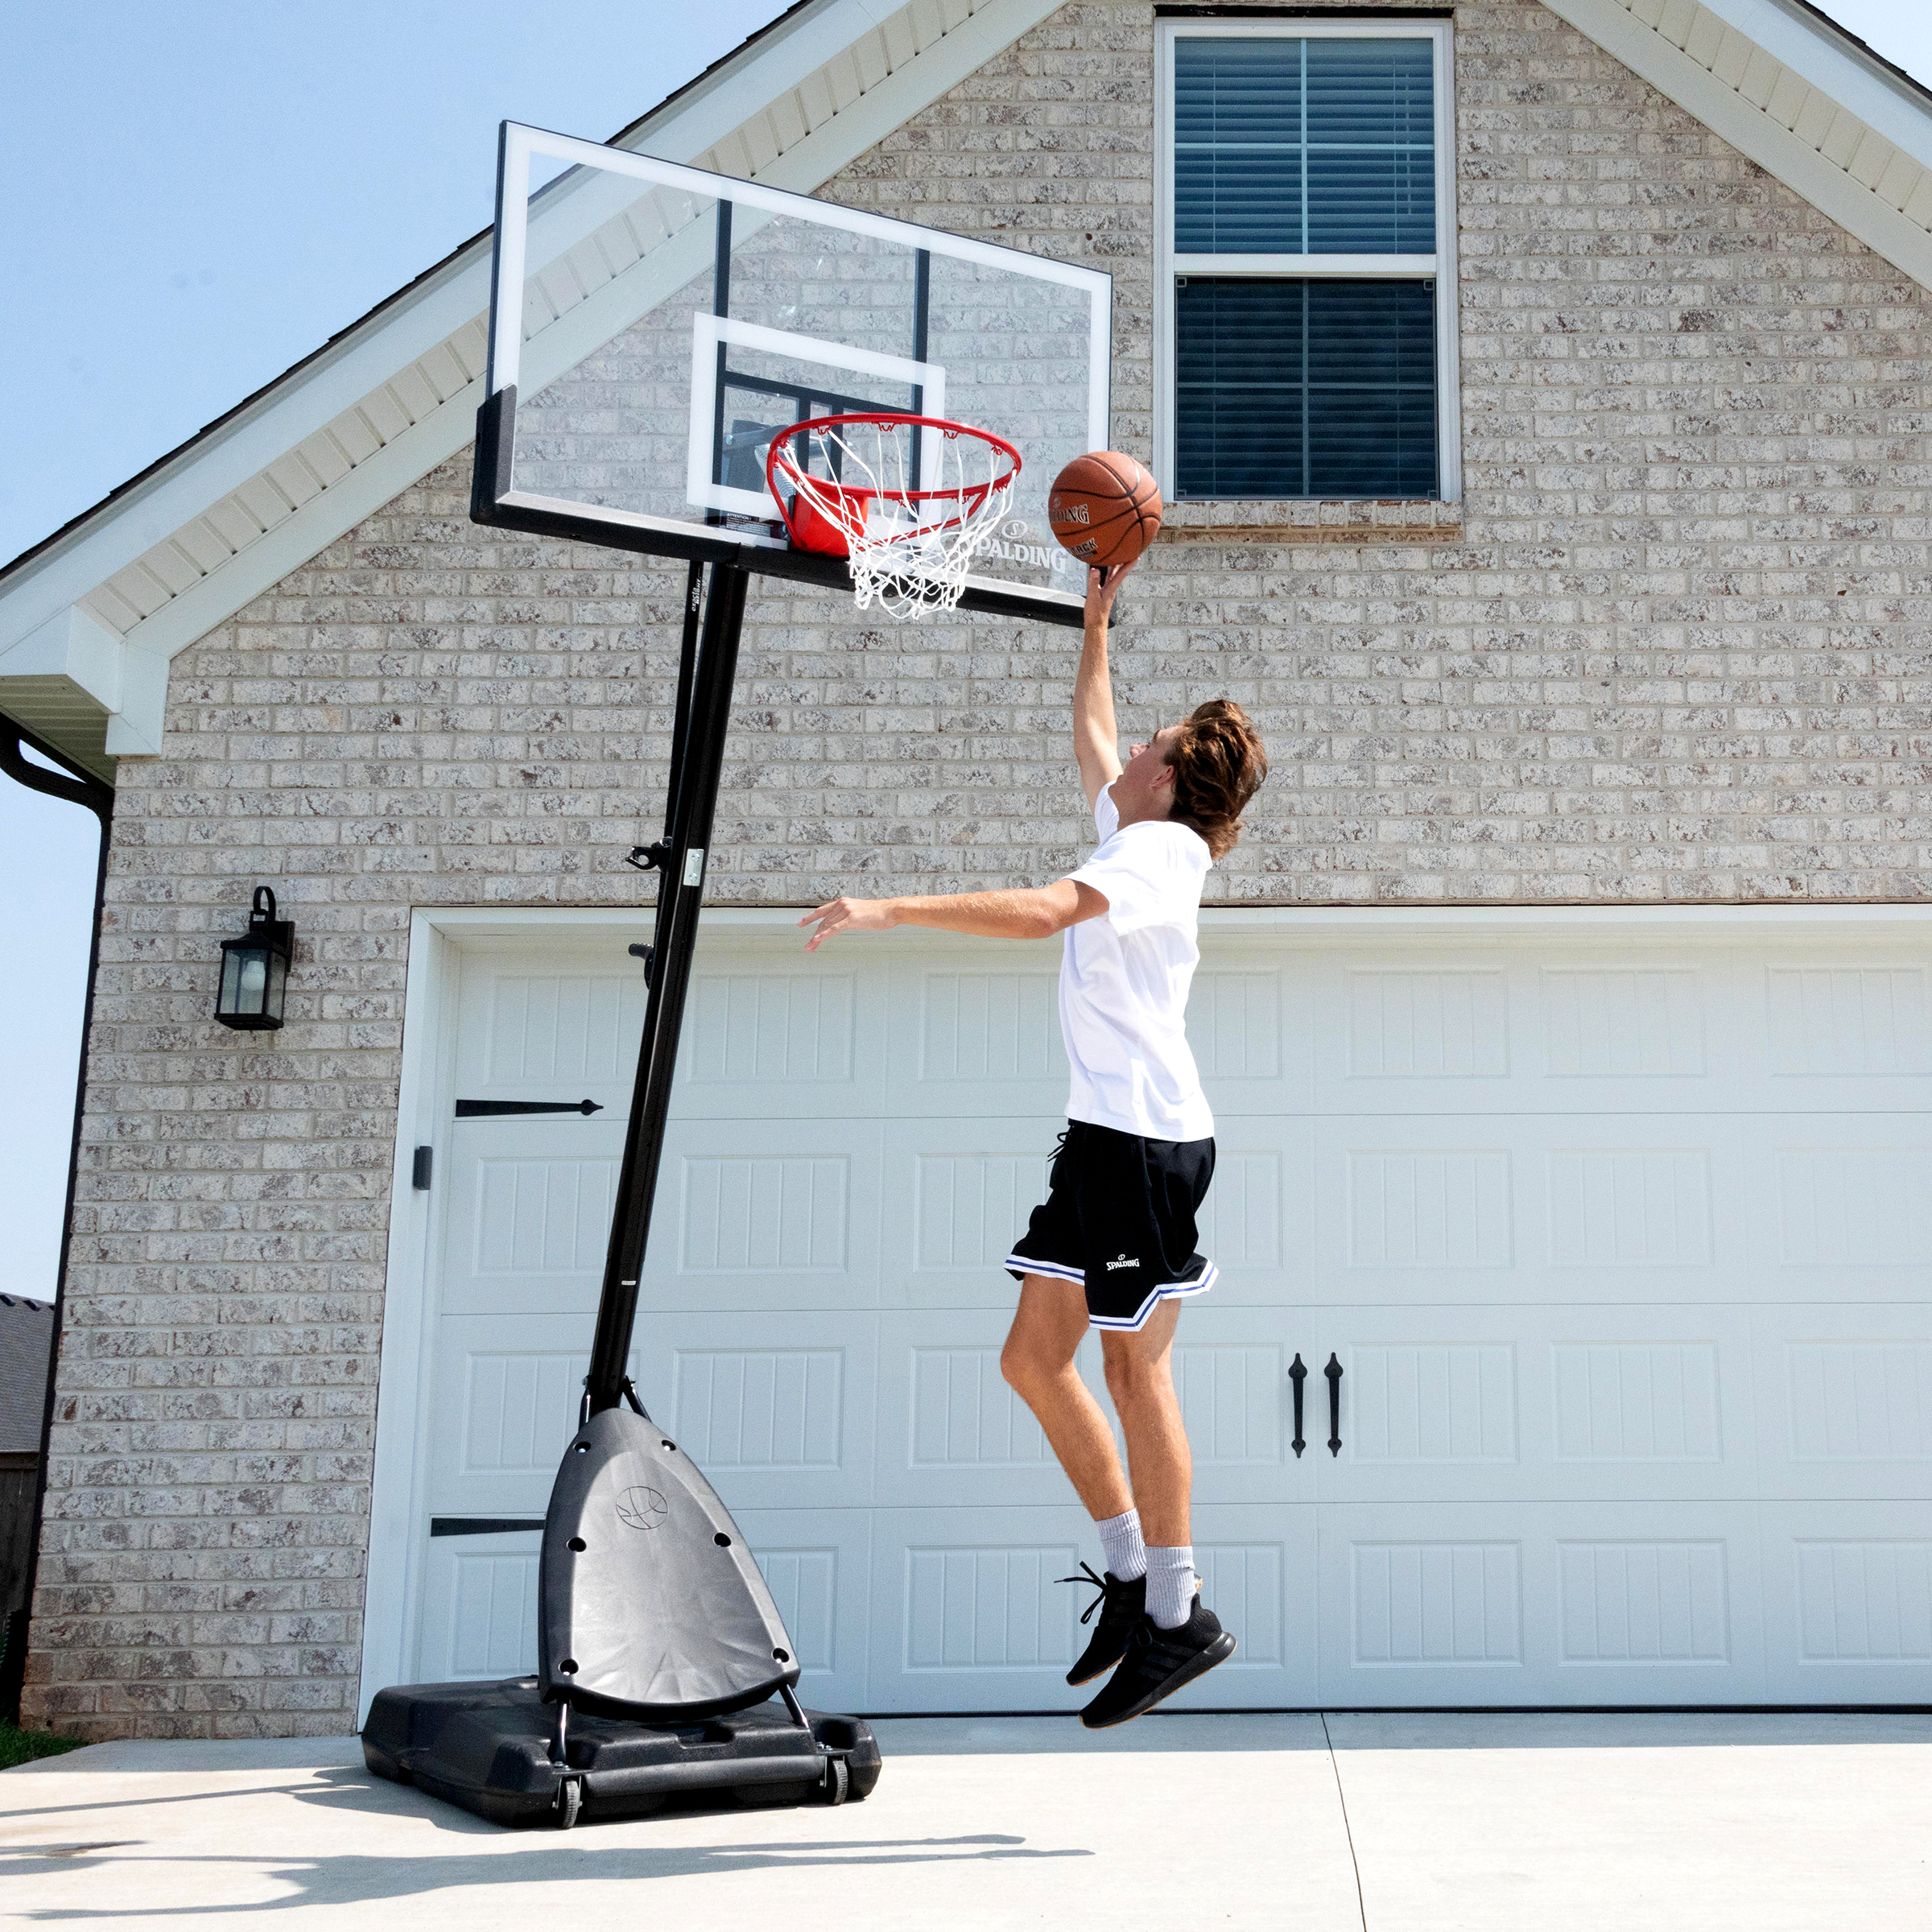 Spalding 54 inch Shatter-proof Polycarbonate Exacta Height® Portable Basketball Hoop System - image 11 of 12